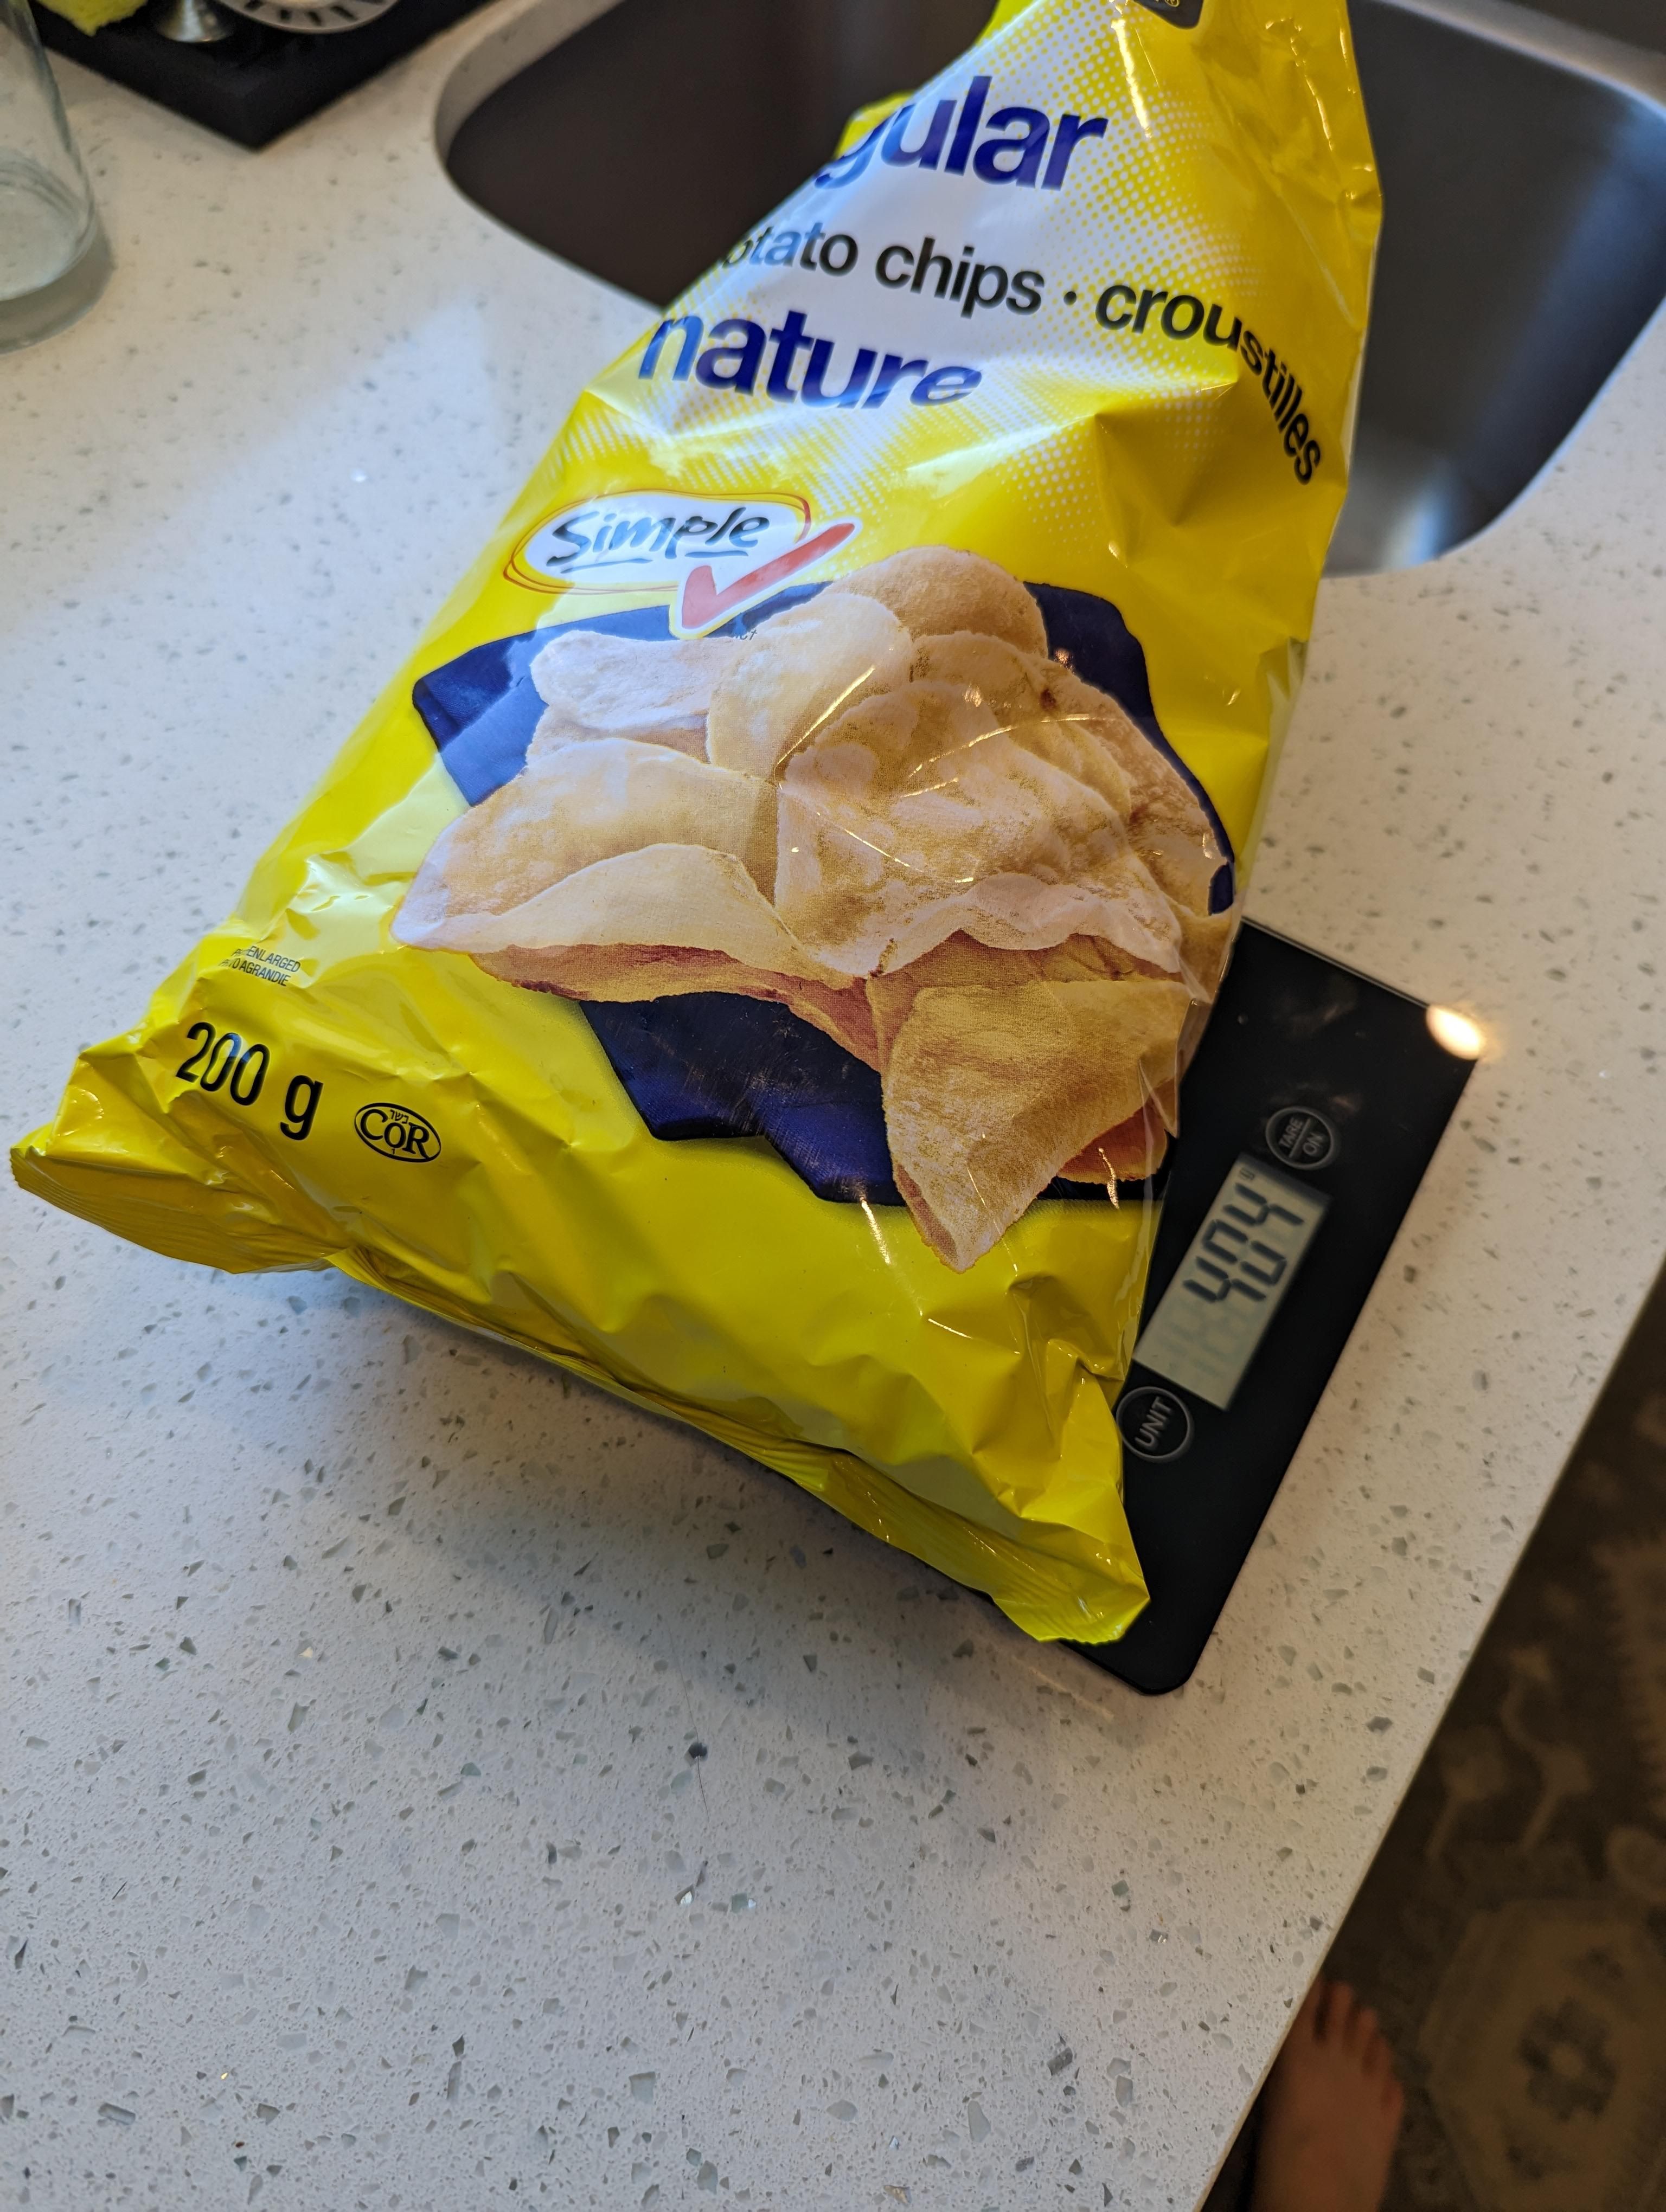 I have pleased the chip gods